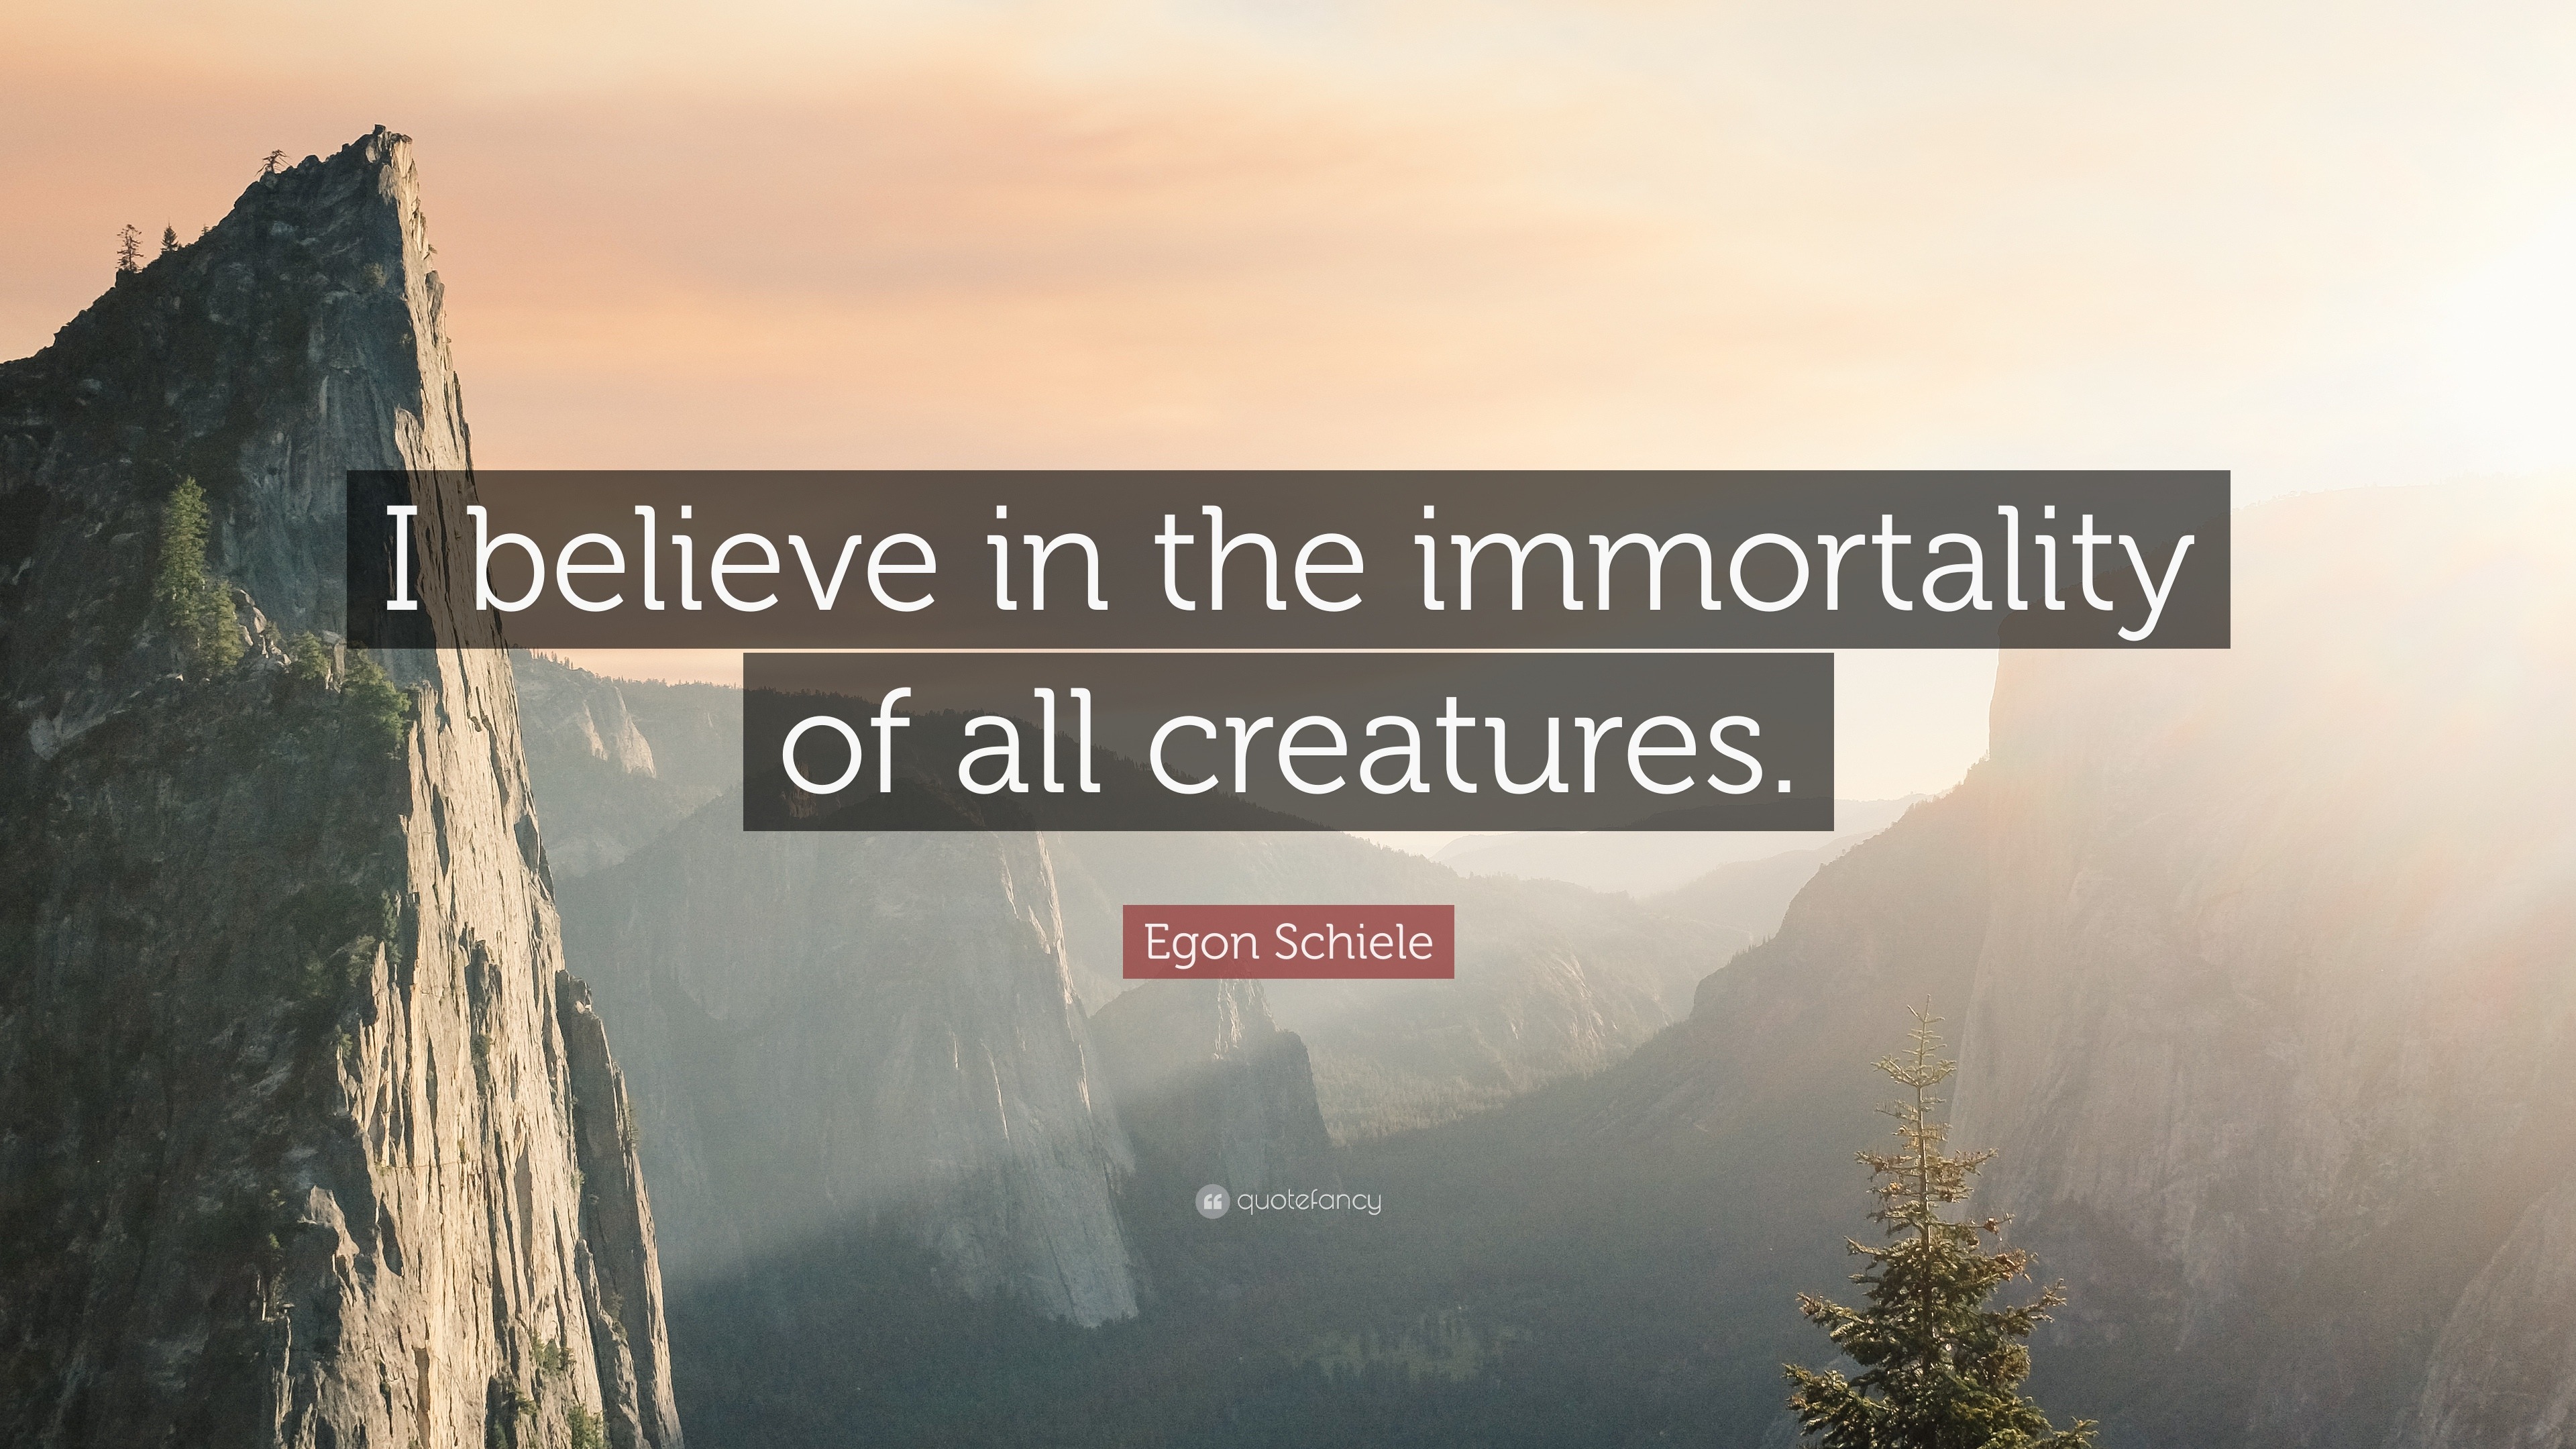 Egon Schiele Quote: "I believe in the immortality of all creatures." (10 wallpapers) - Quotefancy